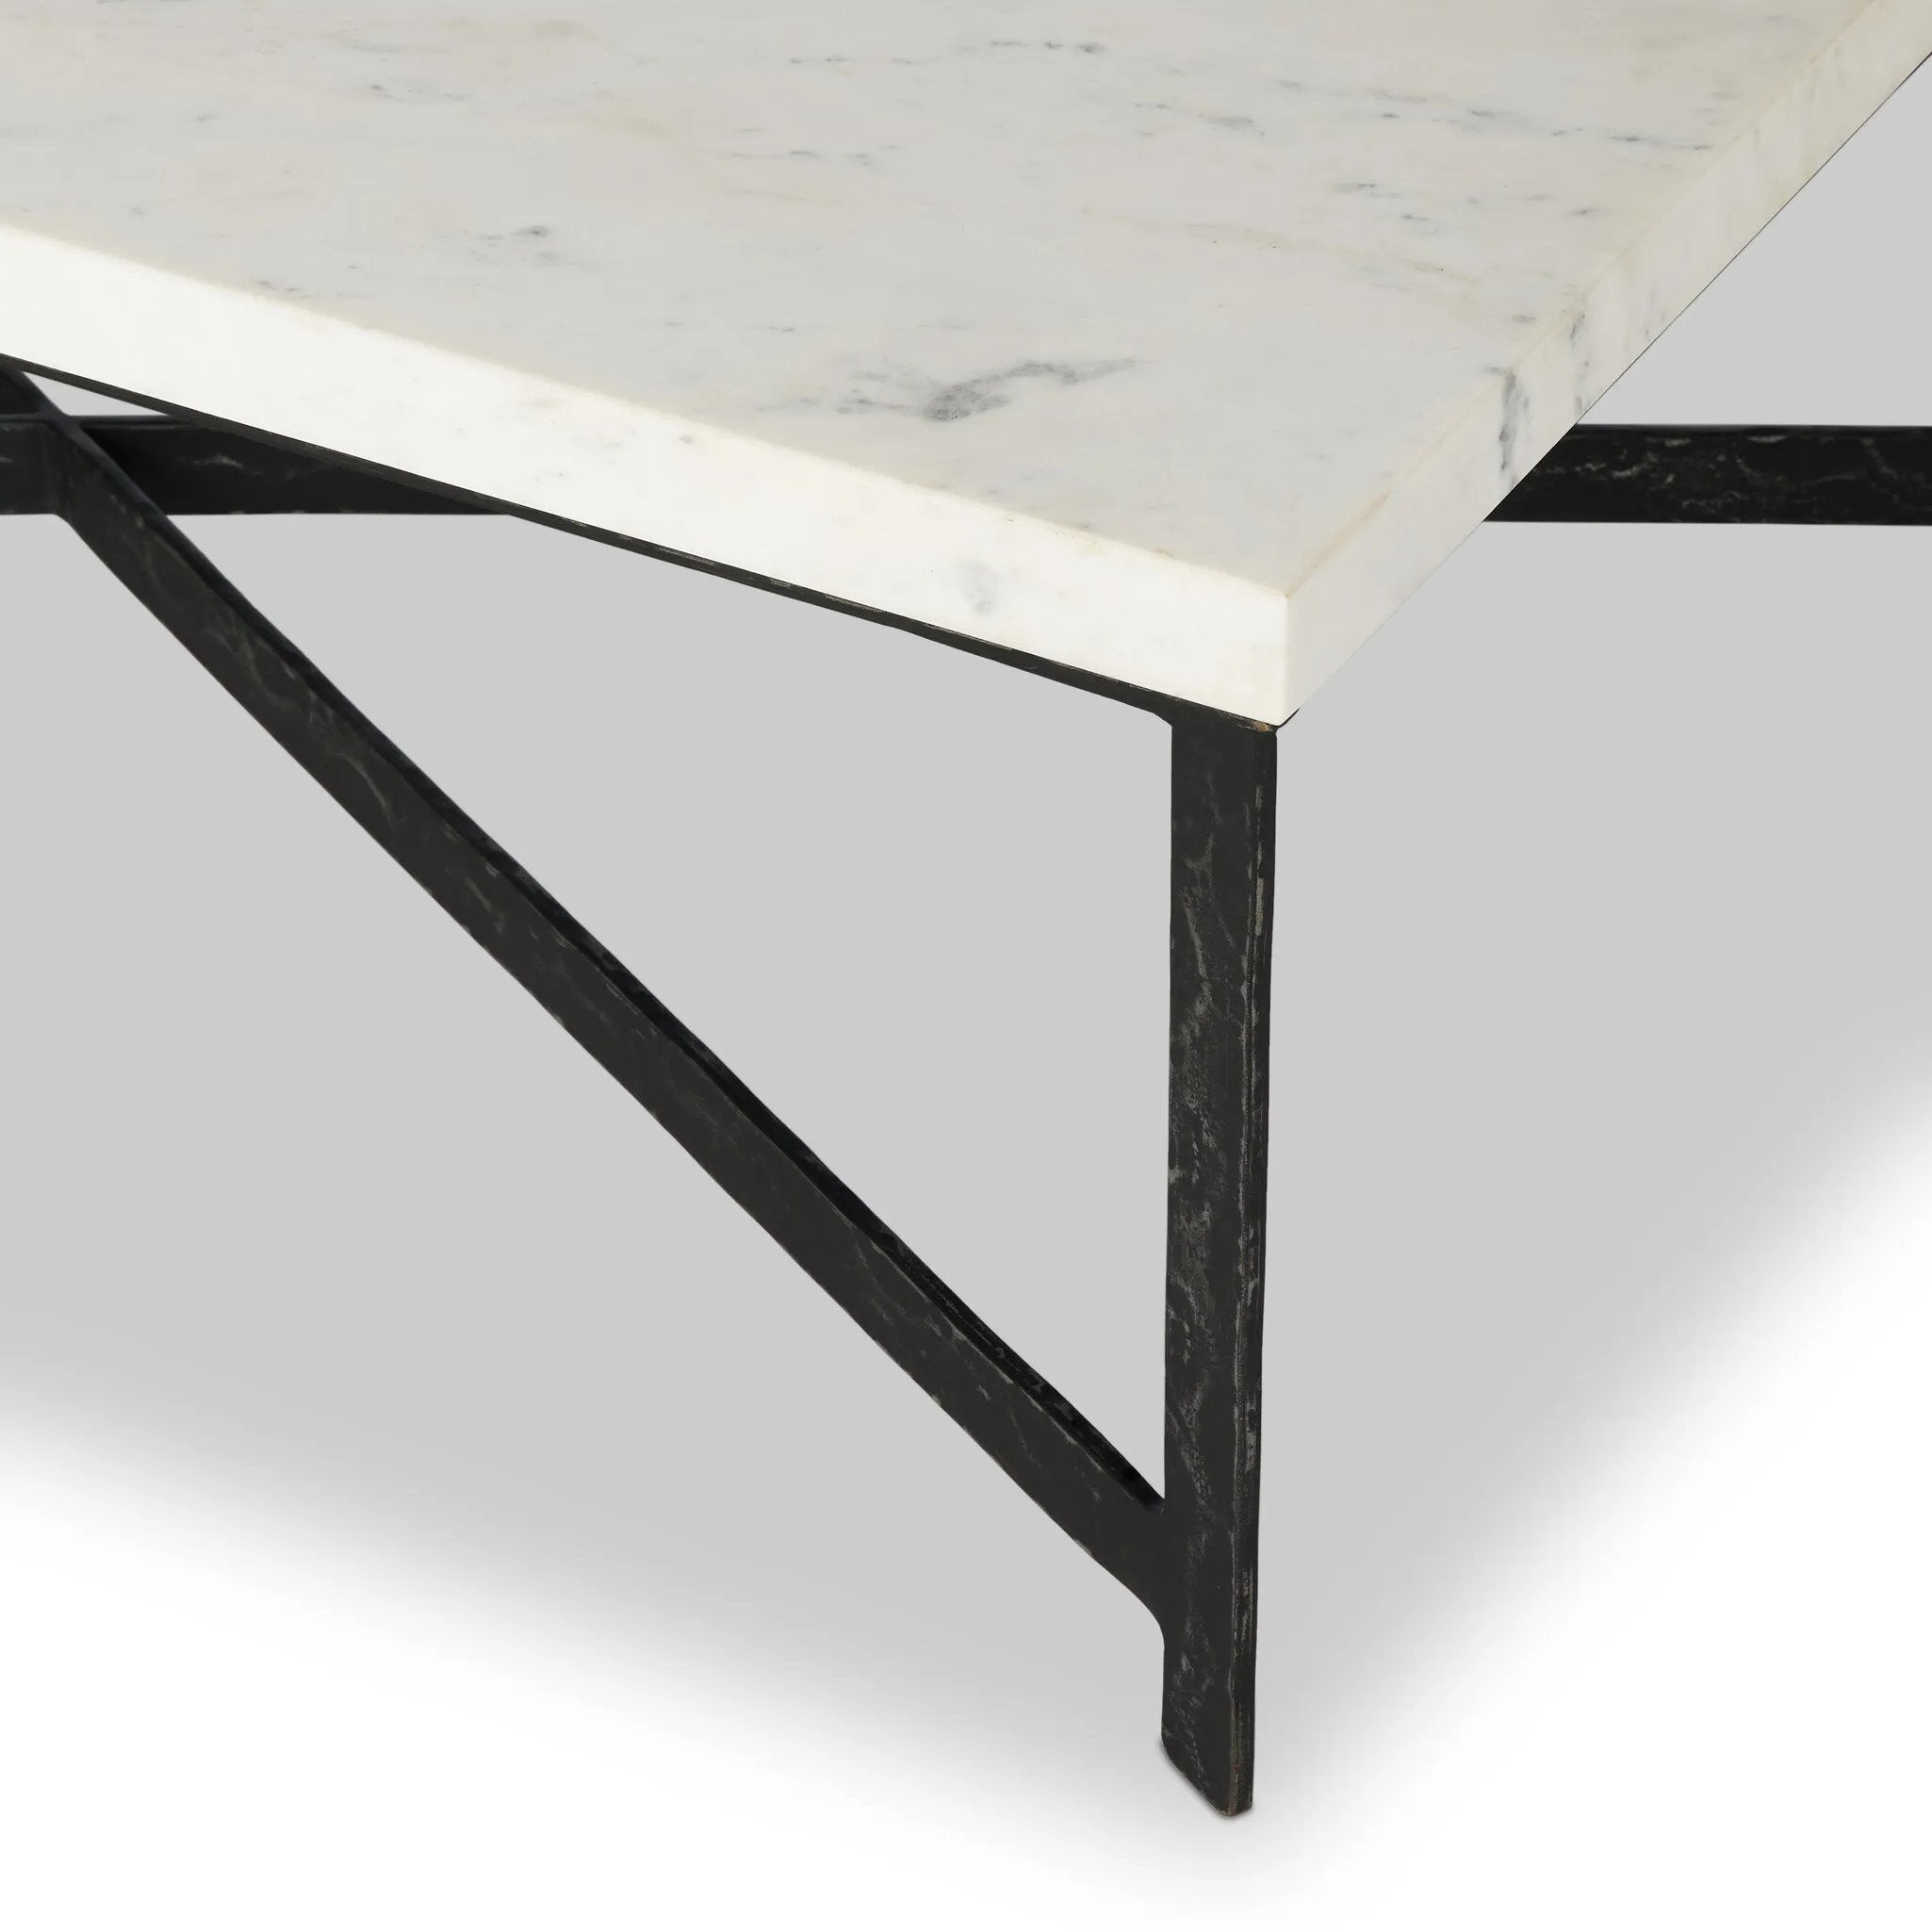 An open, hand-hammered base of black iron supports a rectangular tabletop of white marble, for a beautifully streamlined look with rustic vibes.Collection: Elemen Amethyst Home provides interior design, new home construction design consulting, vintage area rugs, and lighting in the Newport Beach metro area.